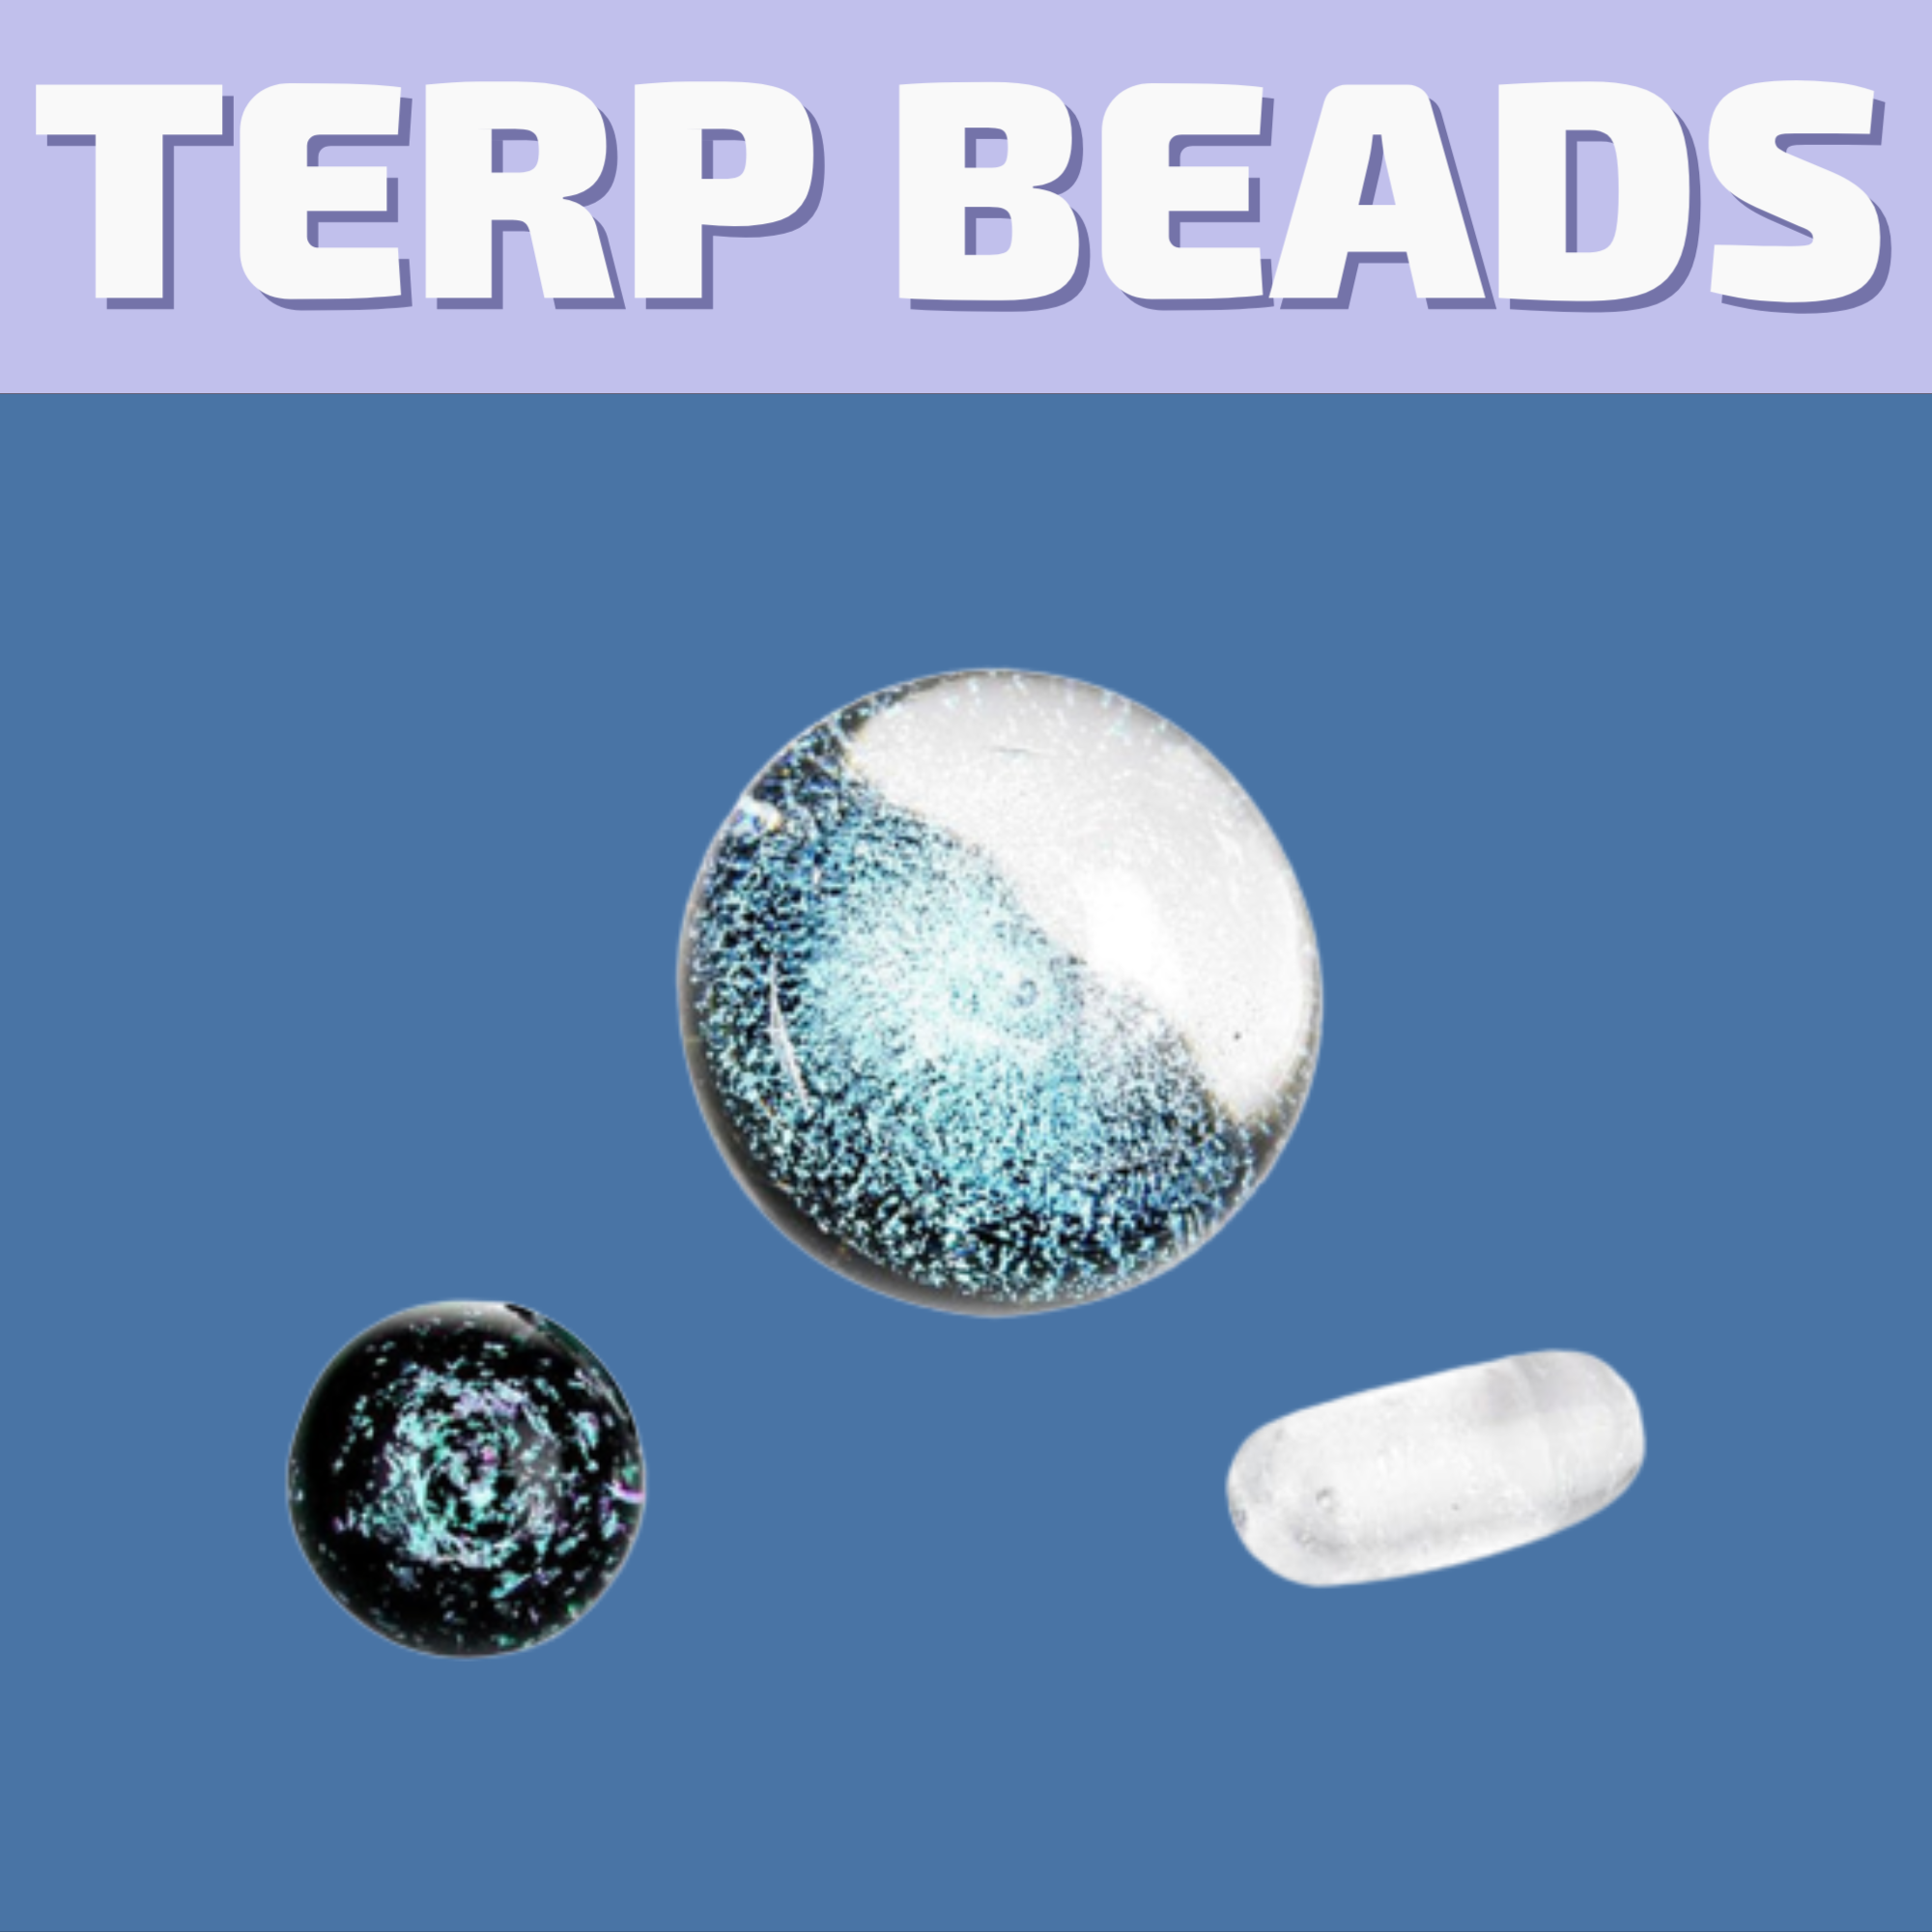 Buy Terp Beads for the best dabs online for same day delivery in Winnipeg or visit our dispensary on 580 Academy Road. 